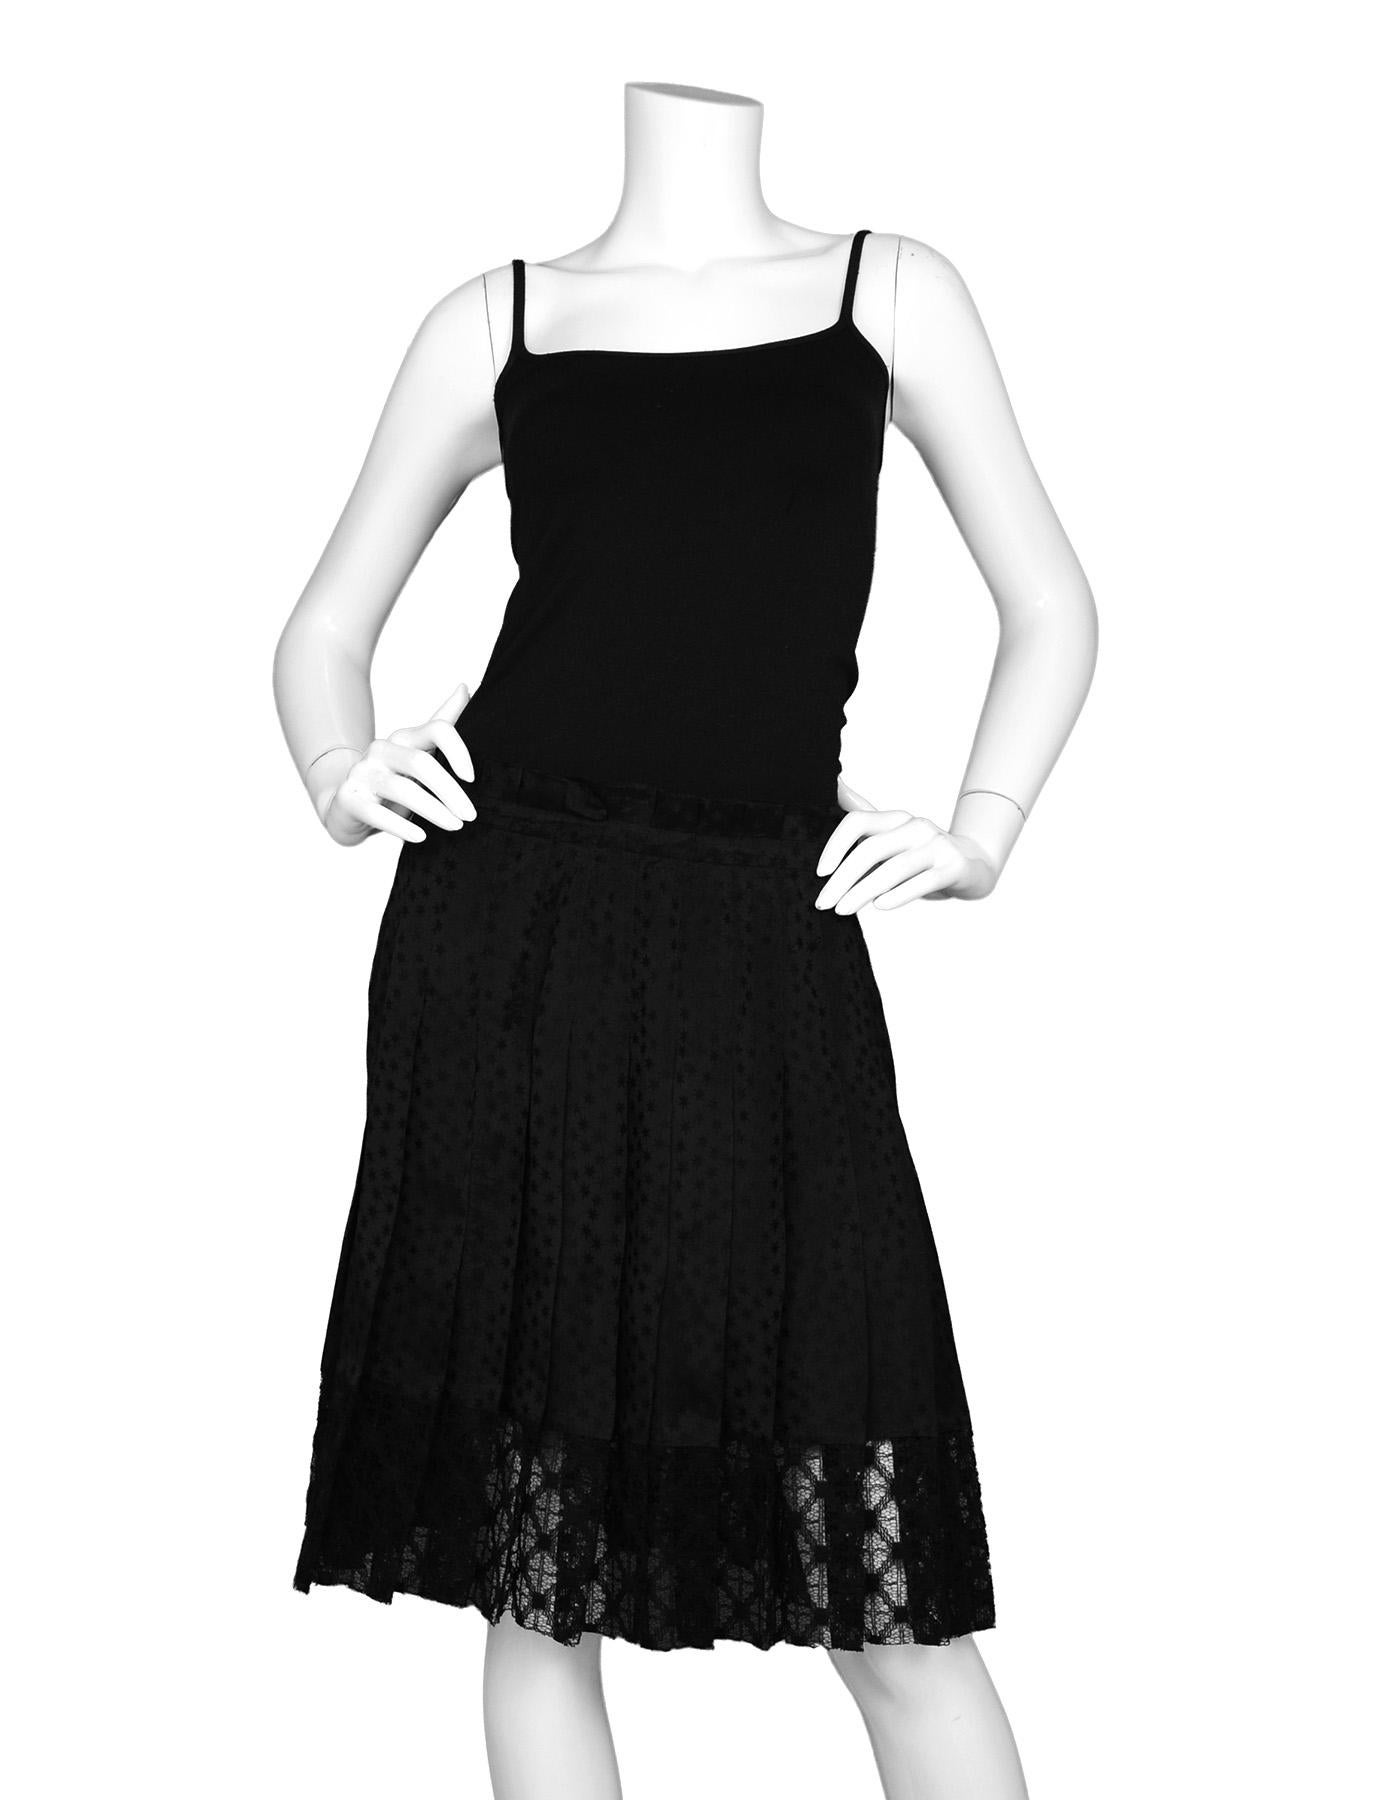 Philosophy Di Lorenzo Serafini NWT Black Pleated Star Print W/ Lace On Bottom Sz 6

Made In:  Romania 
Color: Black
Materials: 100% rayon
Lining:  36% cotton, 34% nylon, 30% rayon
Opening/Closure: Back zipper
Overall Condition: New with tags